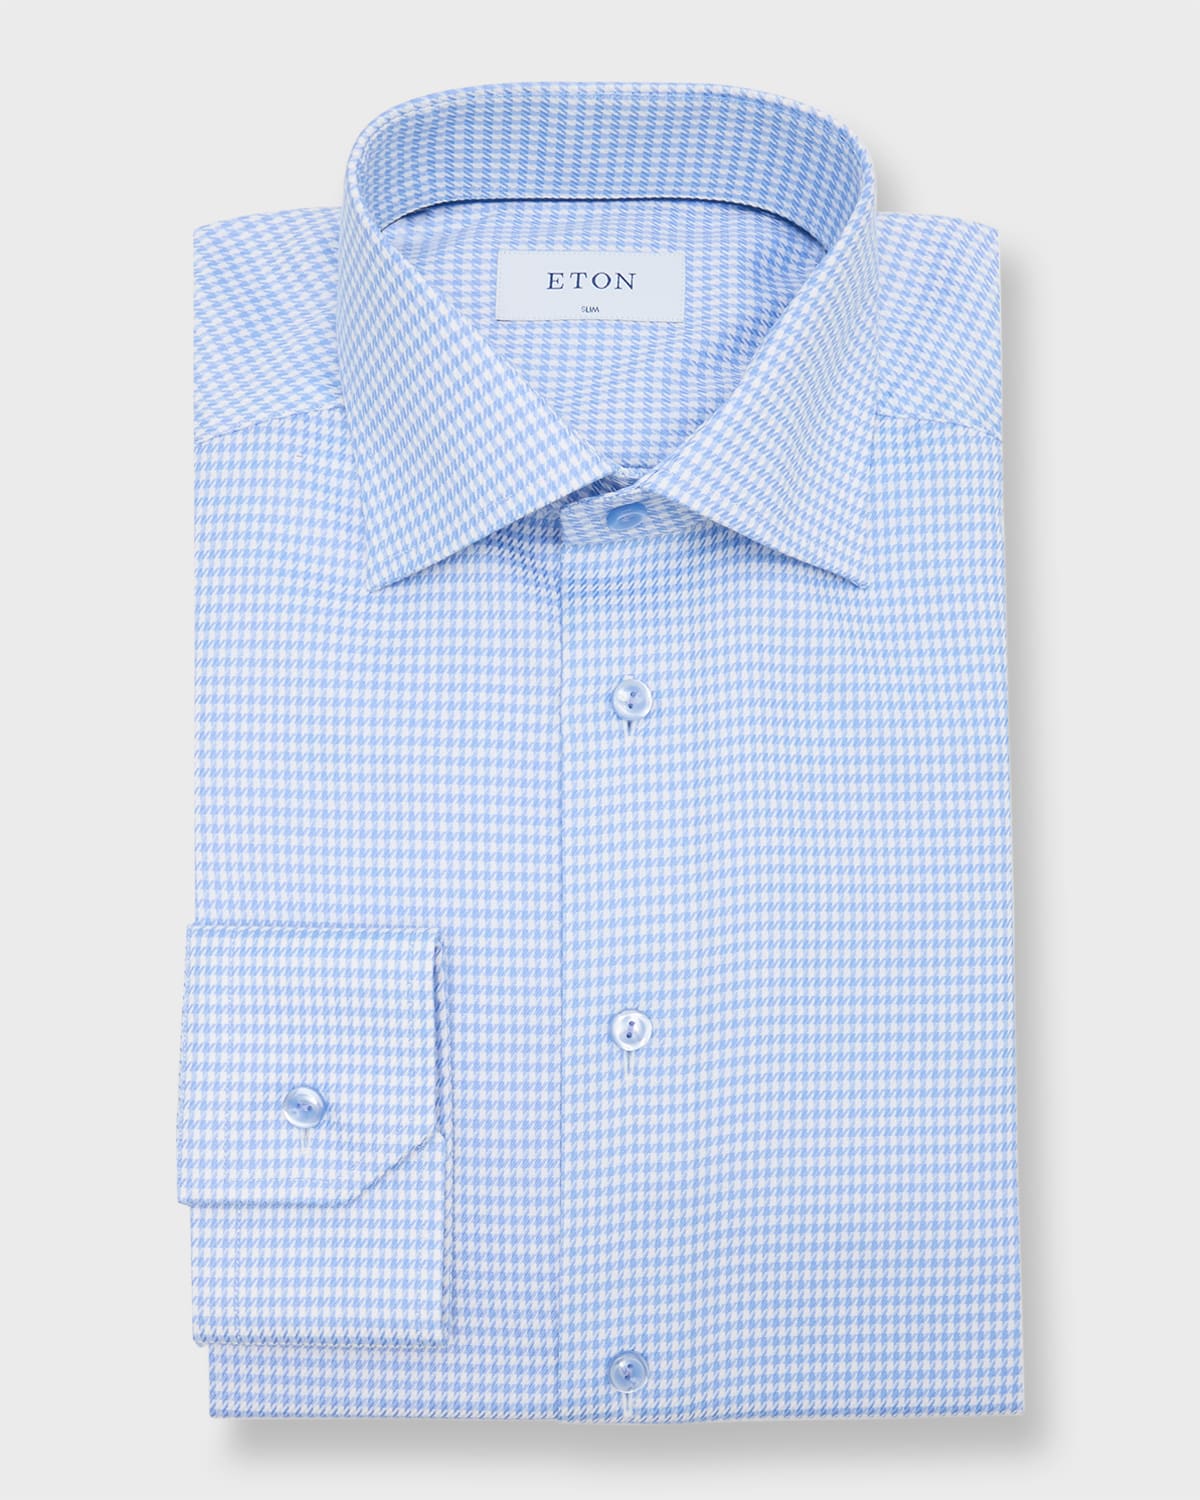 Eton Slim Fit Twill Houndstooth Button Front Shirt In Light Blue